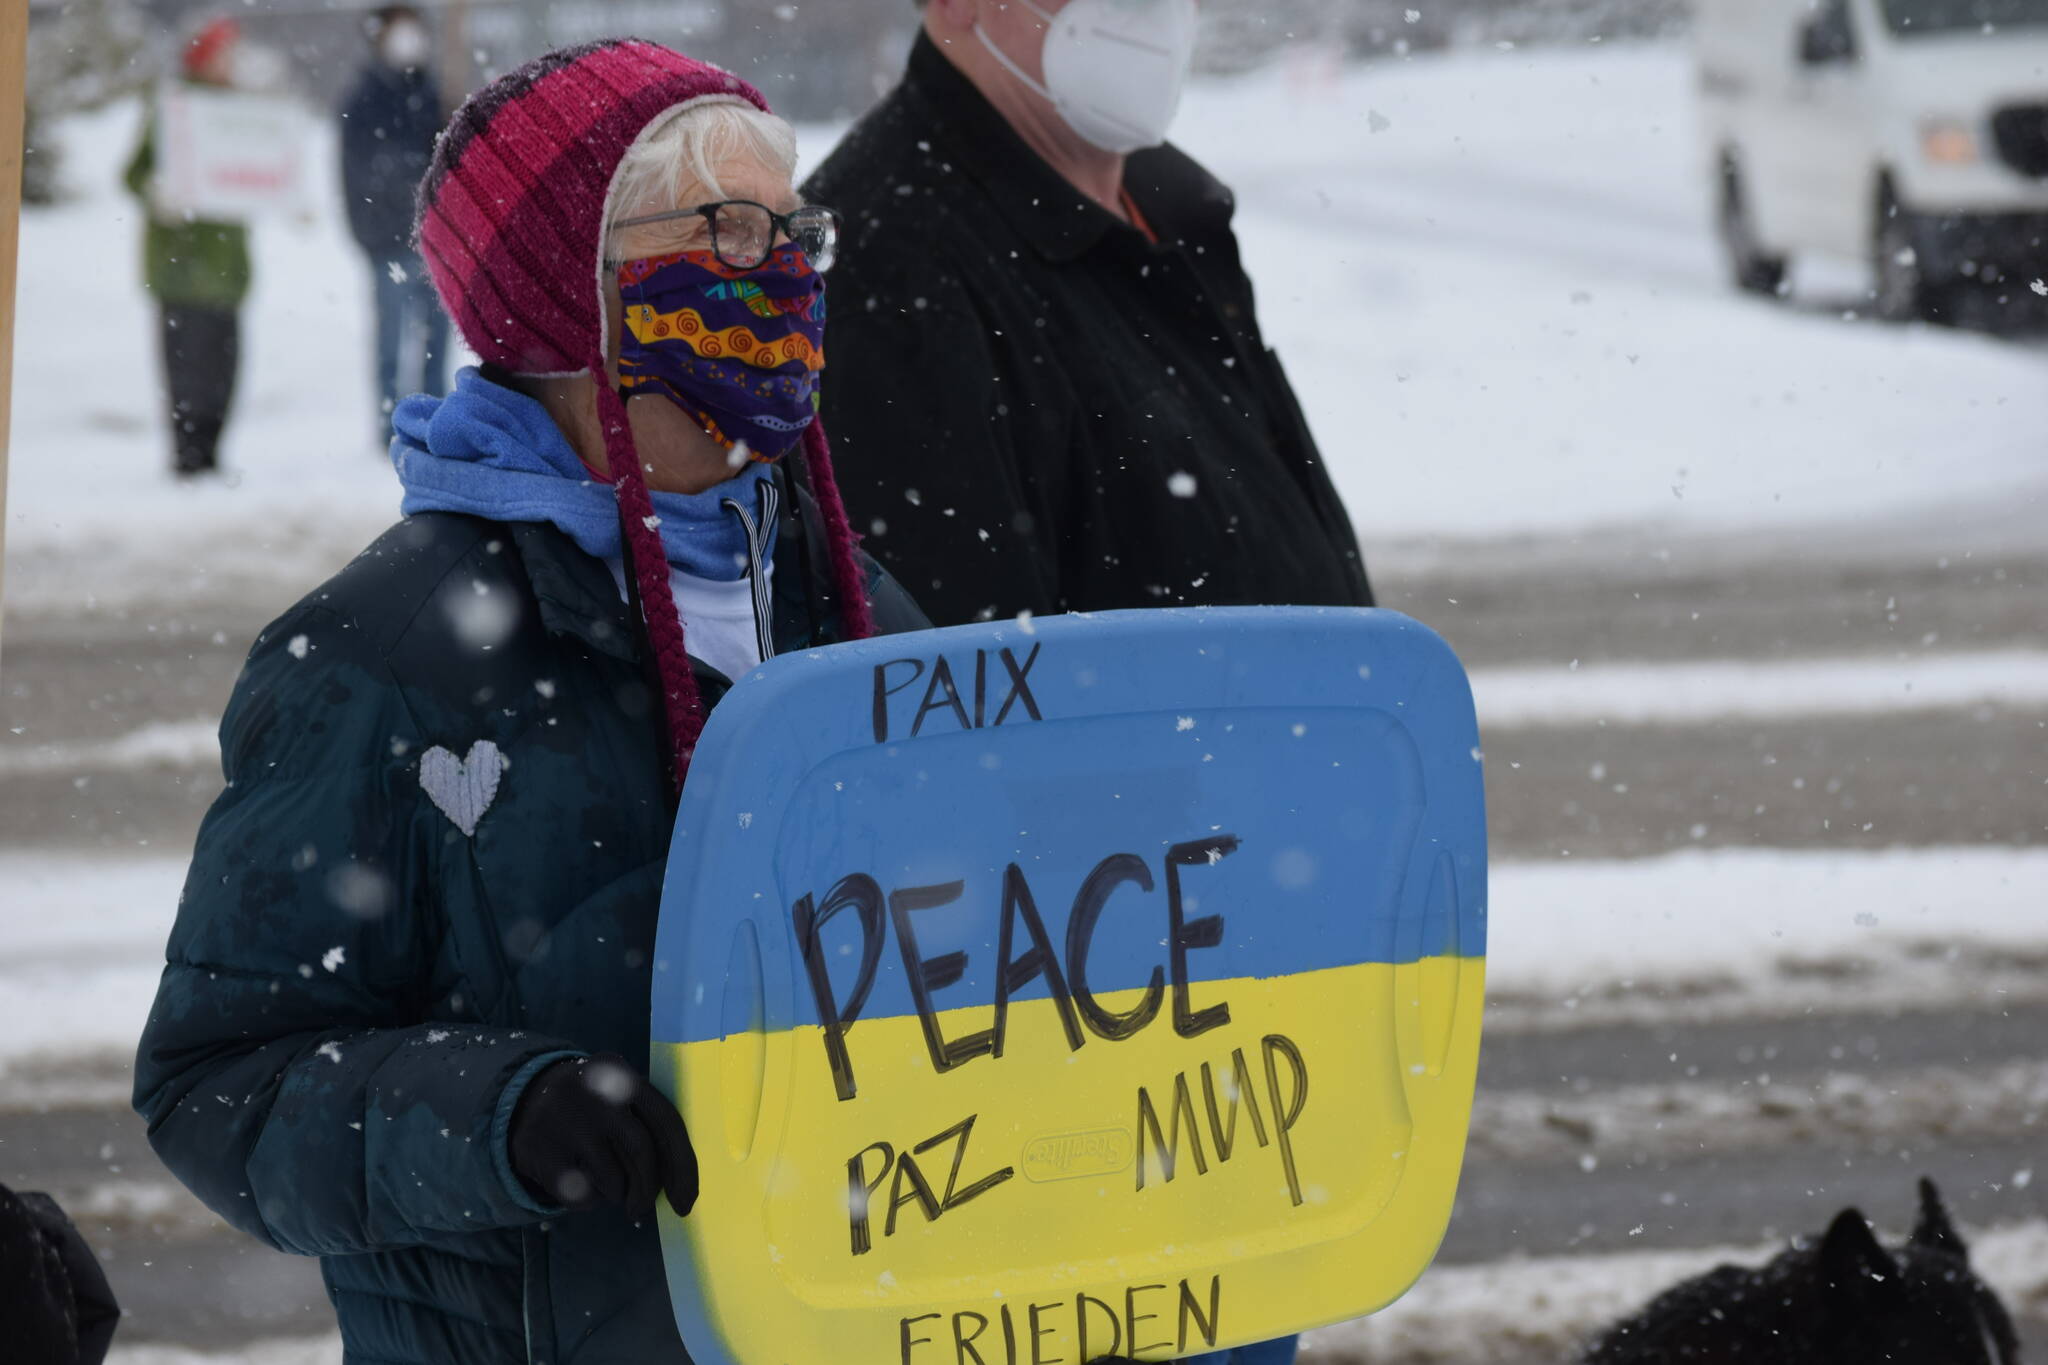 Susie Smalley demonstrates during a vigil in support of Ukraine on Saturday, March 5, 2022, in Soldotna, Alaska. (Camille Botello/Peninsula Clarion)